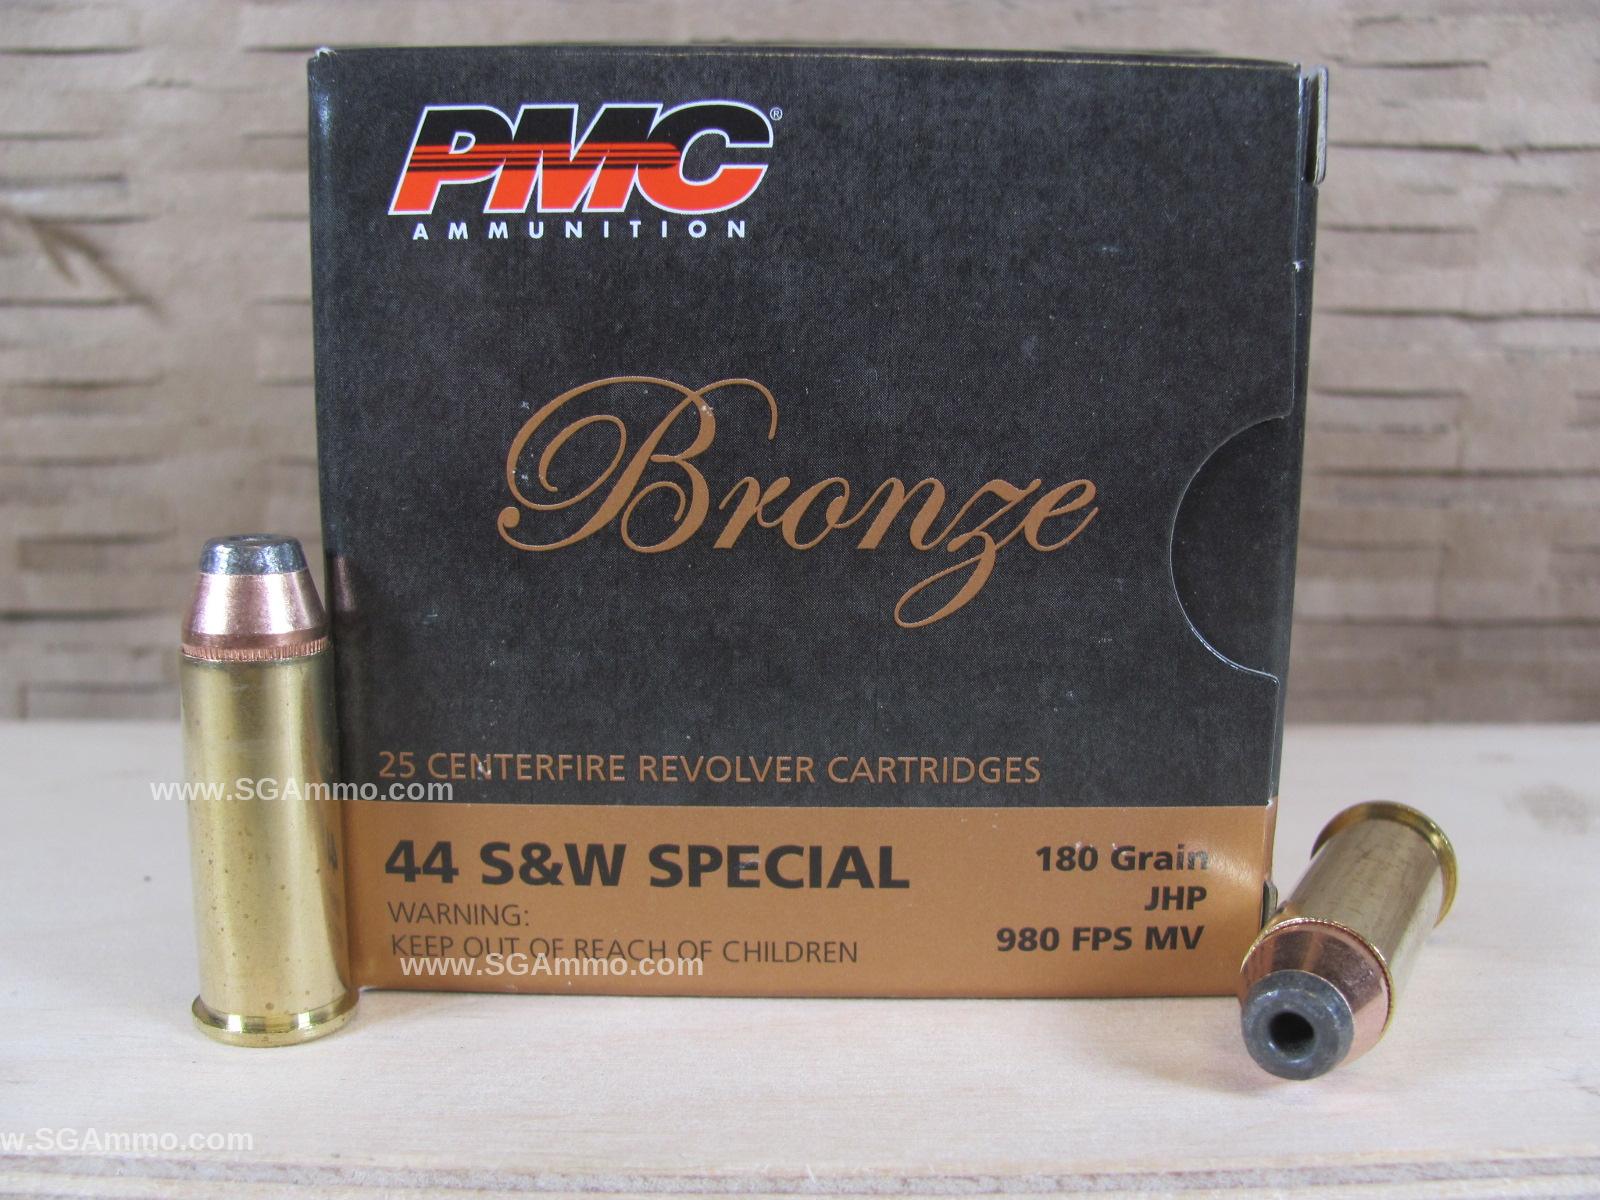 200 Round Plastic Can - 44 Special PMC 180 Grain Hollow Point Ammo - 44SB - Packed in Small Plastic Canister